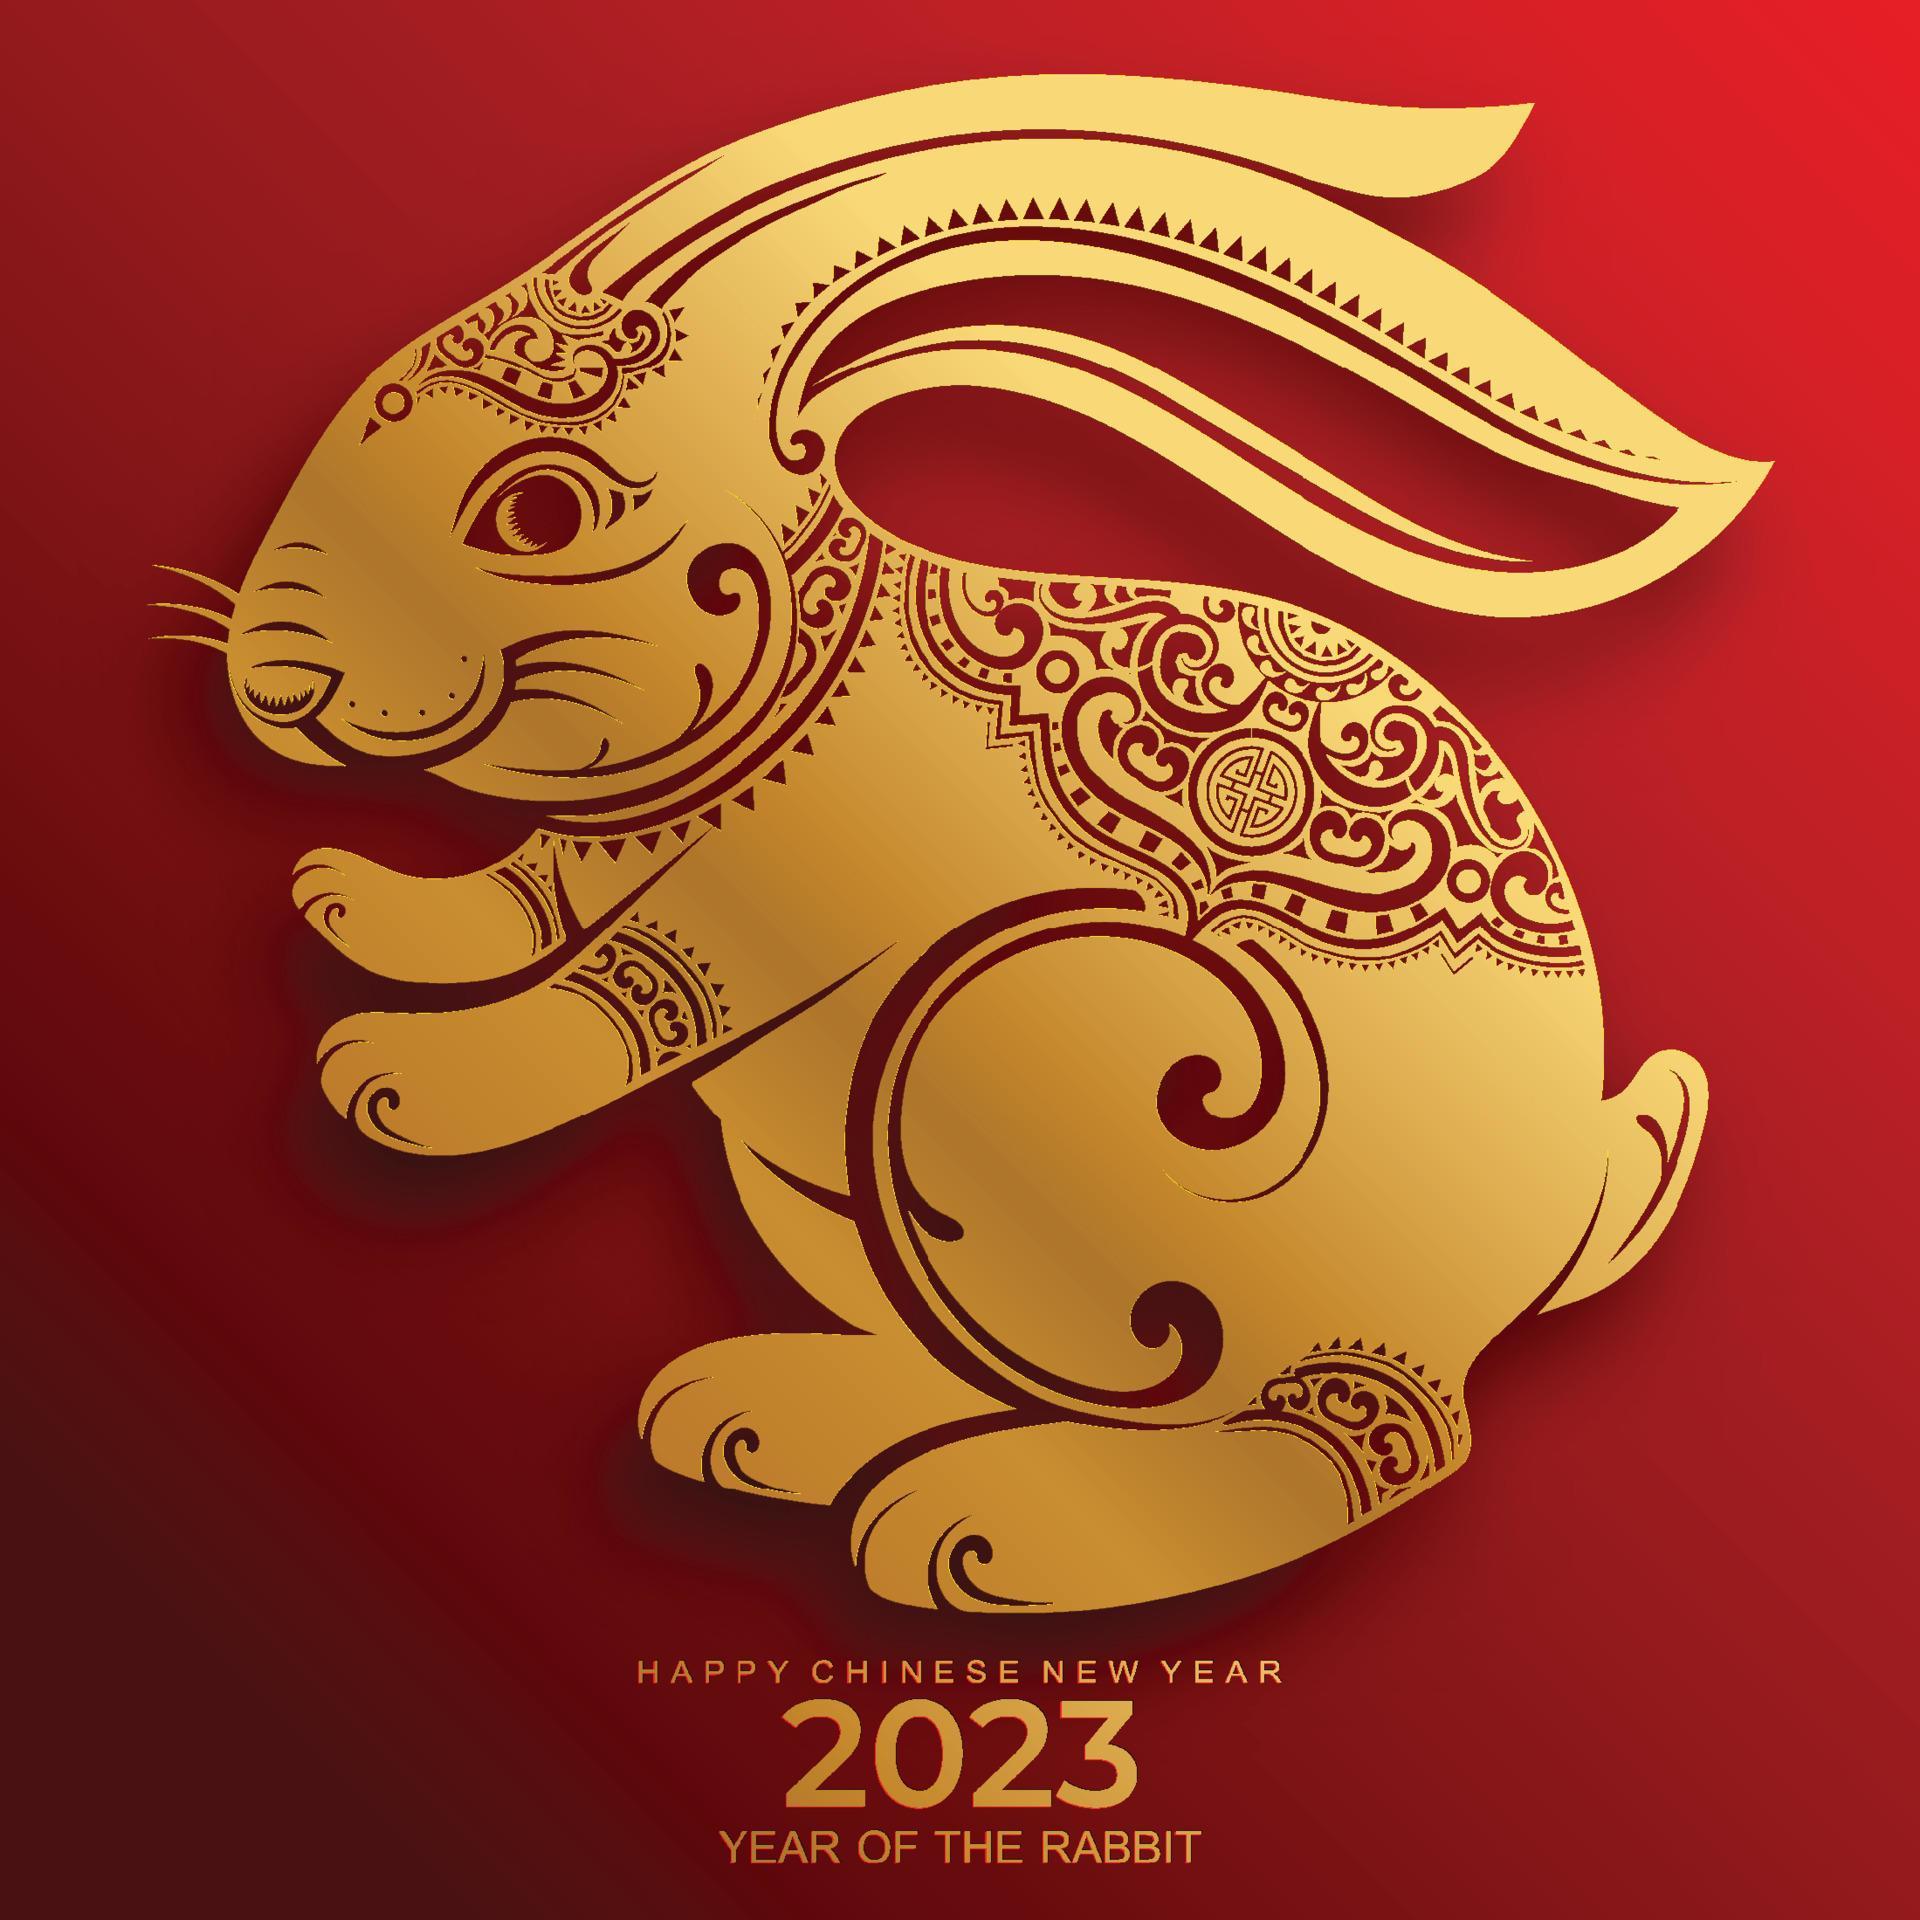 Albums 96+ Images happy new year 2023 year of the rabbit Completed